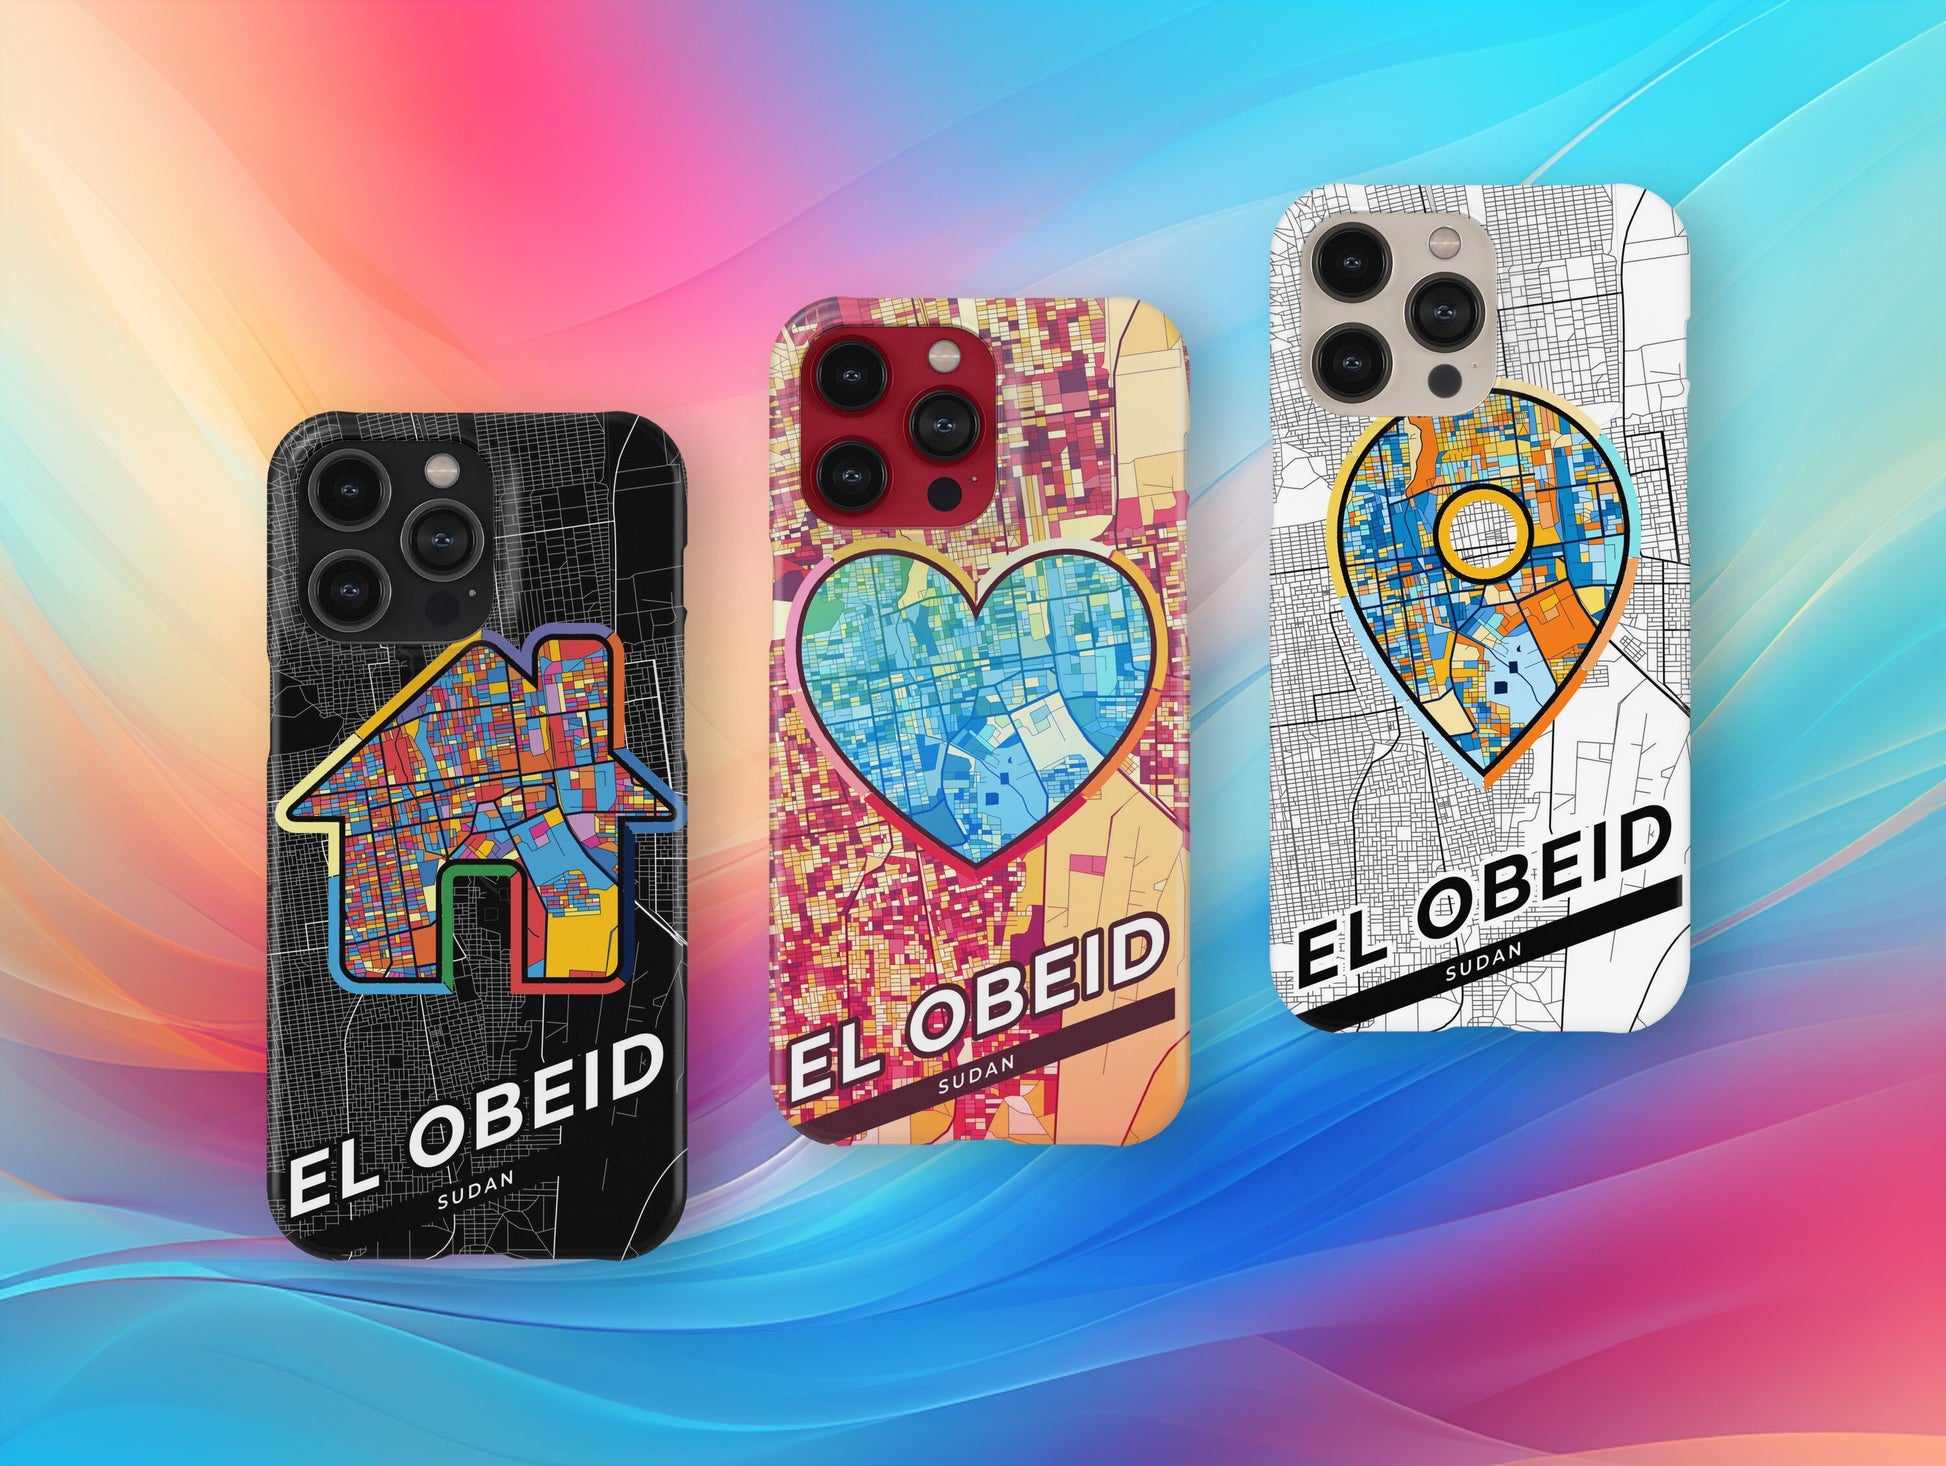 El Obeid Sudan slim phone case with colorful icon. Birthday, wedding or housewarming gift. Couple match cases.